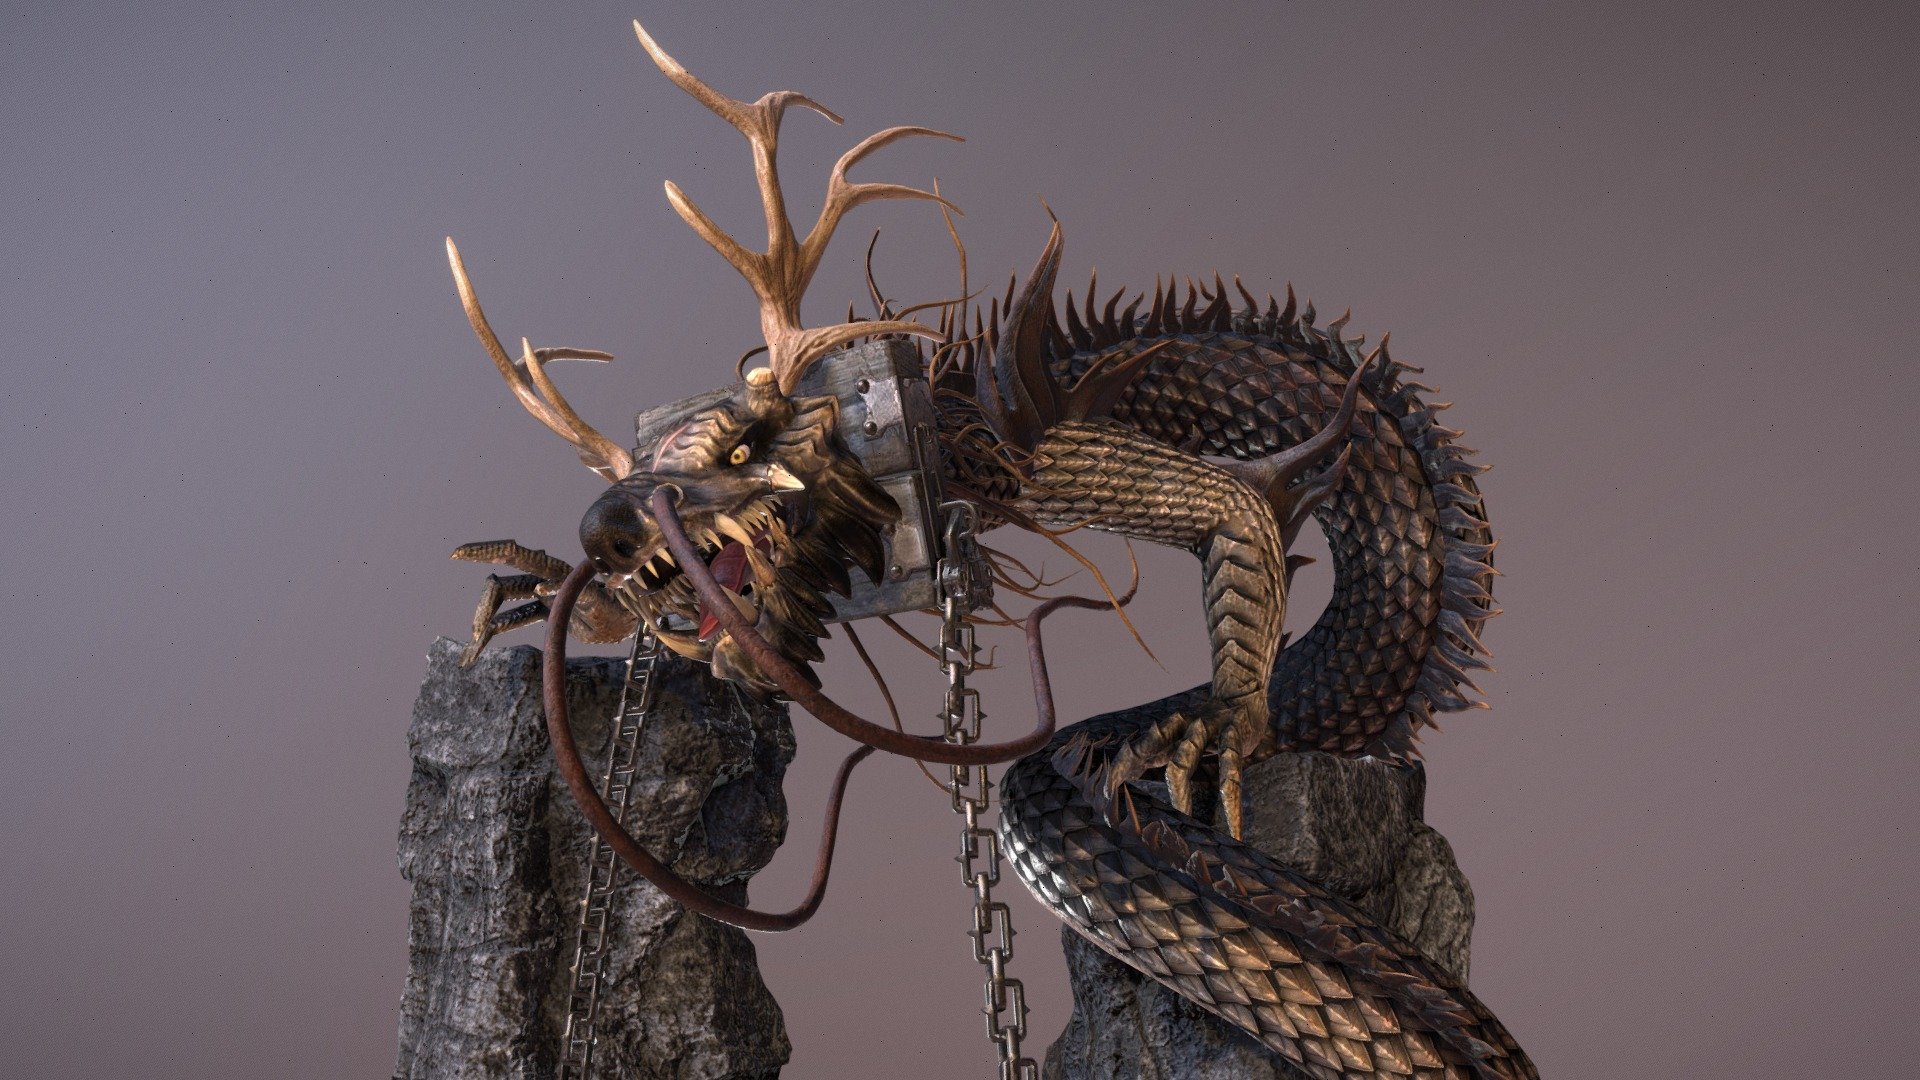 A japnenese inspired serpent dragon design. A sculpture on which I tried new brushes and tools. It came out cool enough that I decided to do a quick retopology and paint the whole thing 3d model